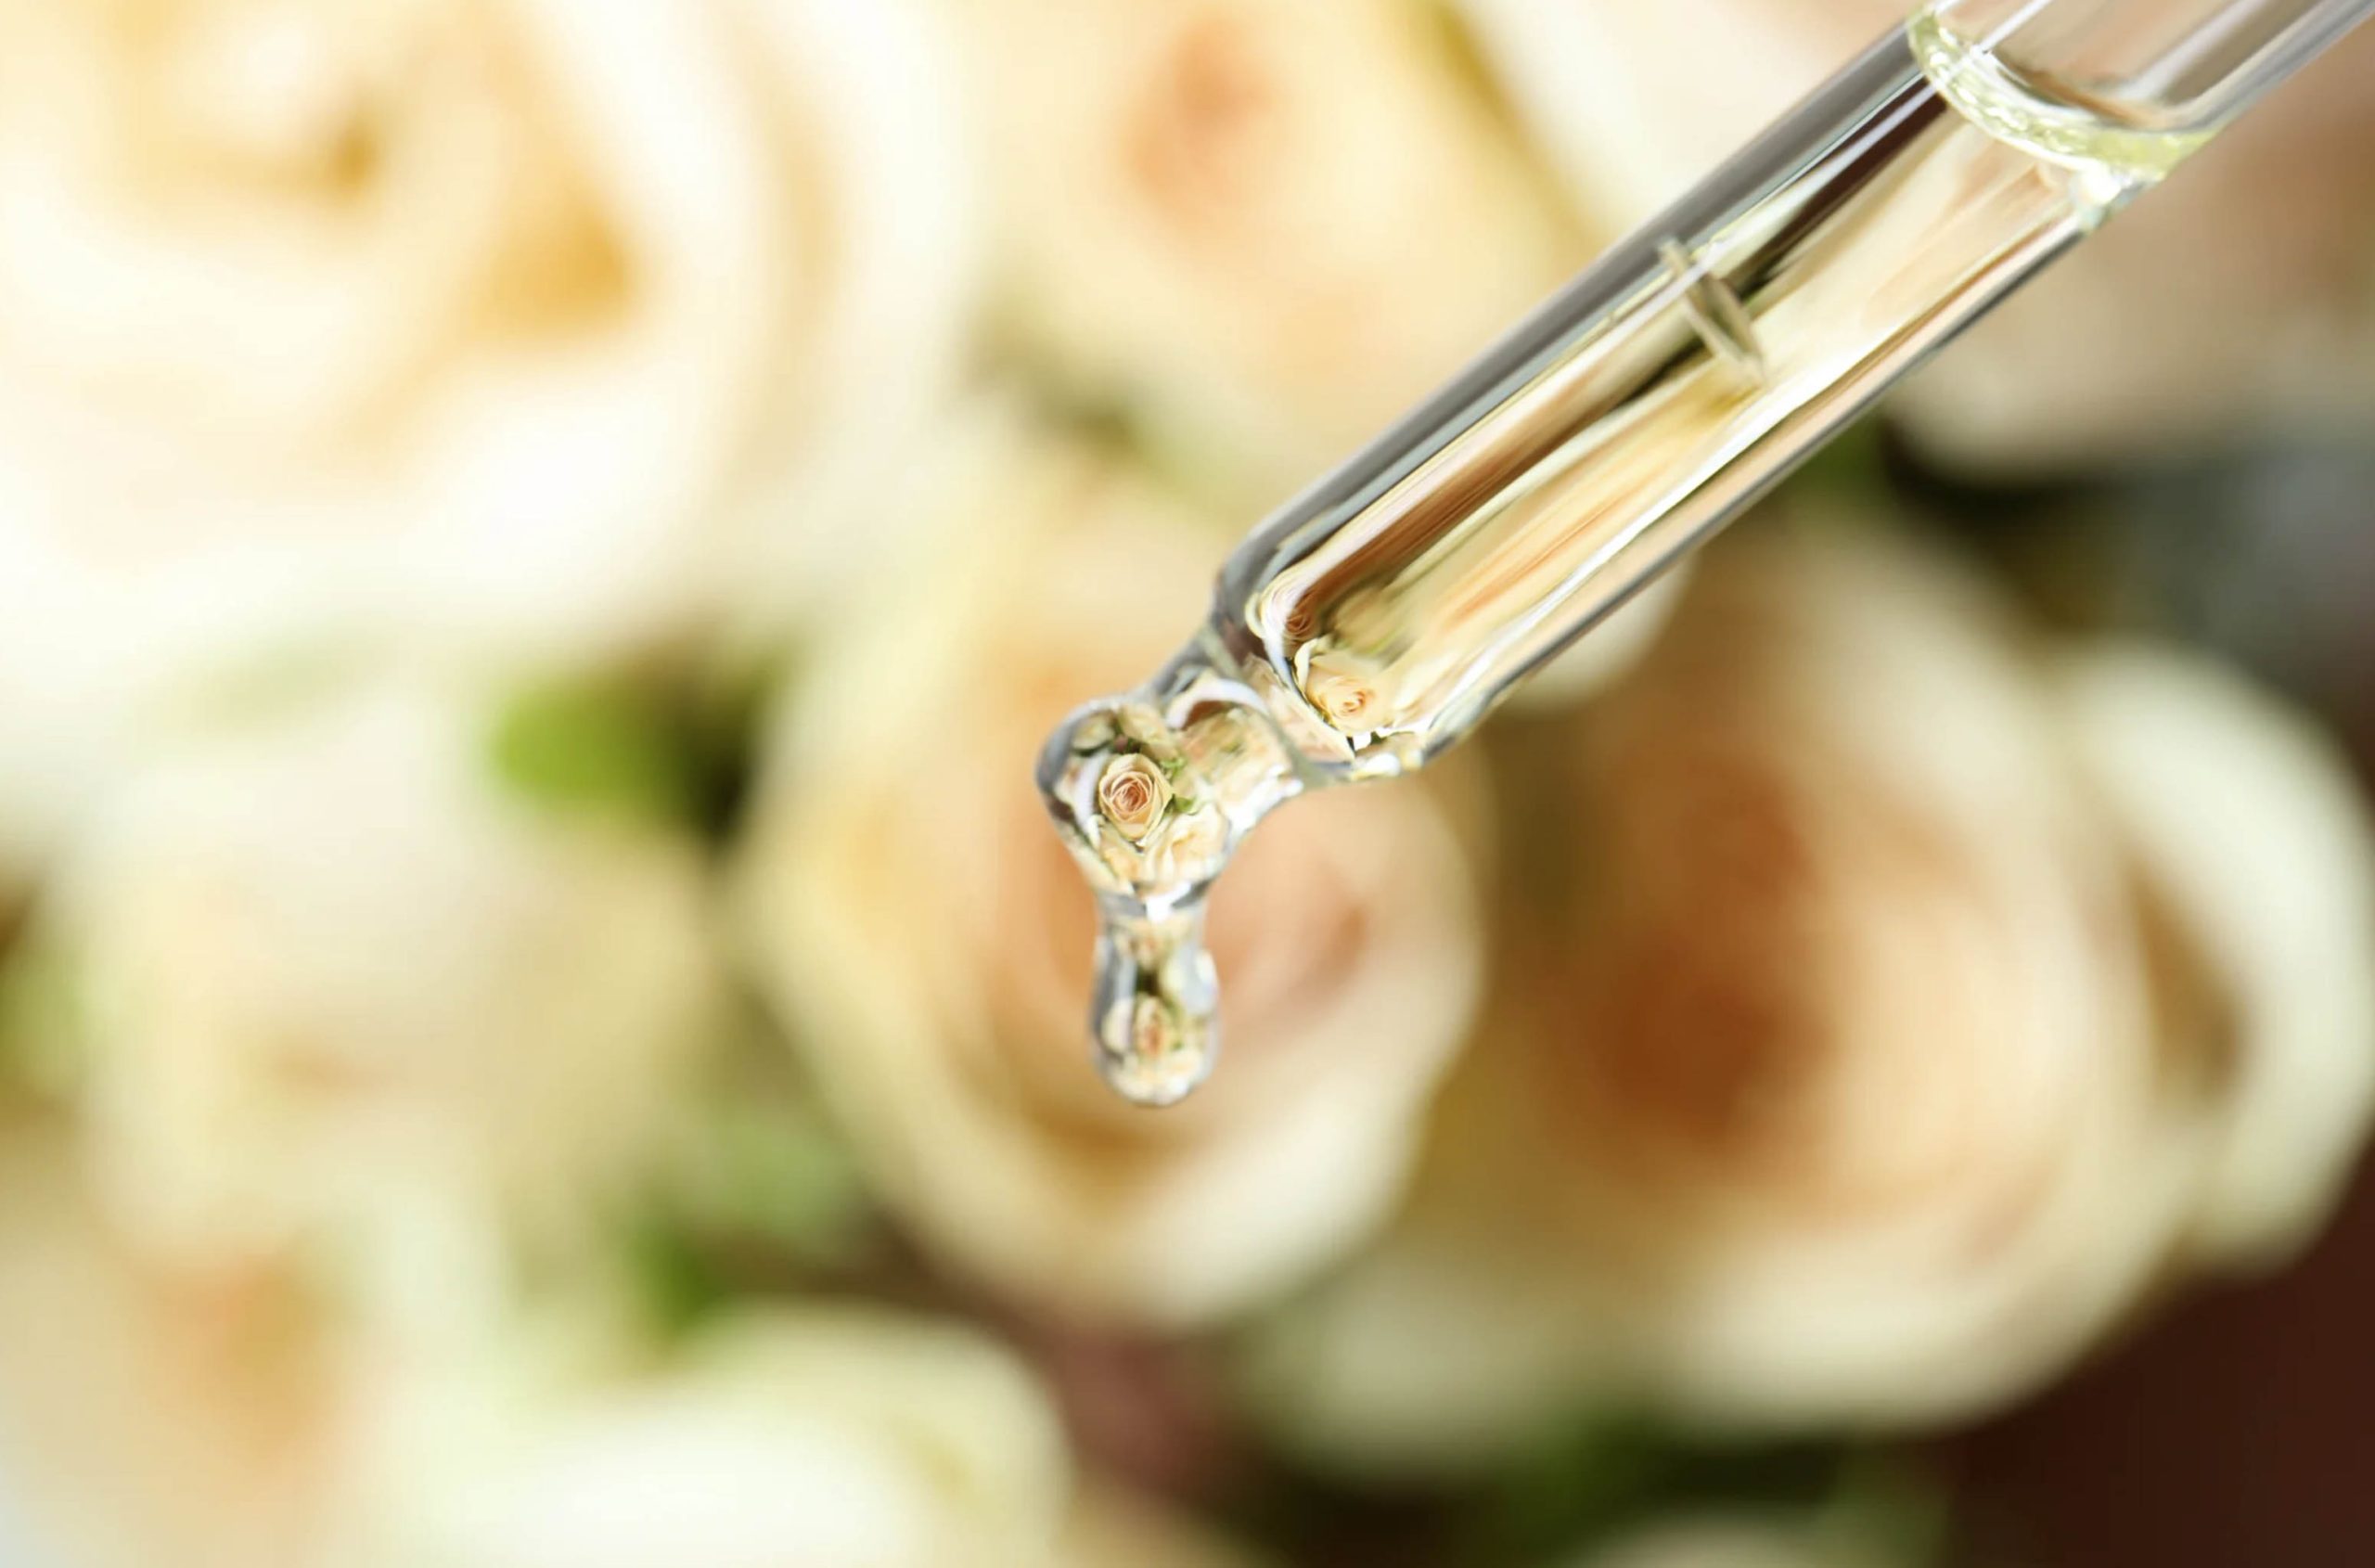 ACGrace - A syringe with a drop of oil in front of a bouquet of roses.